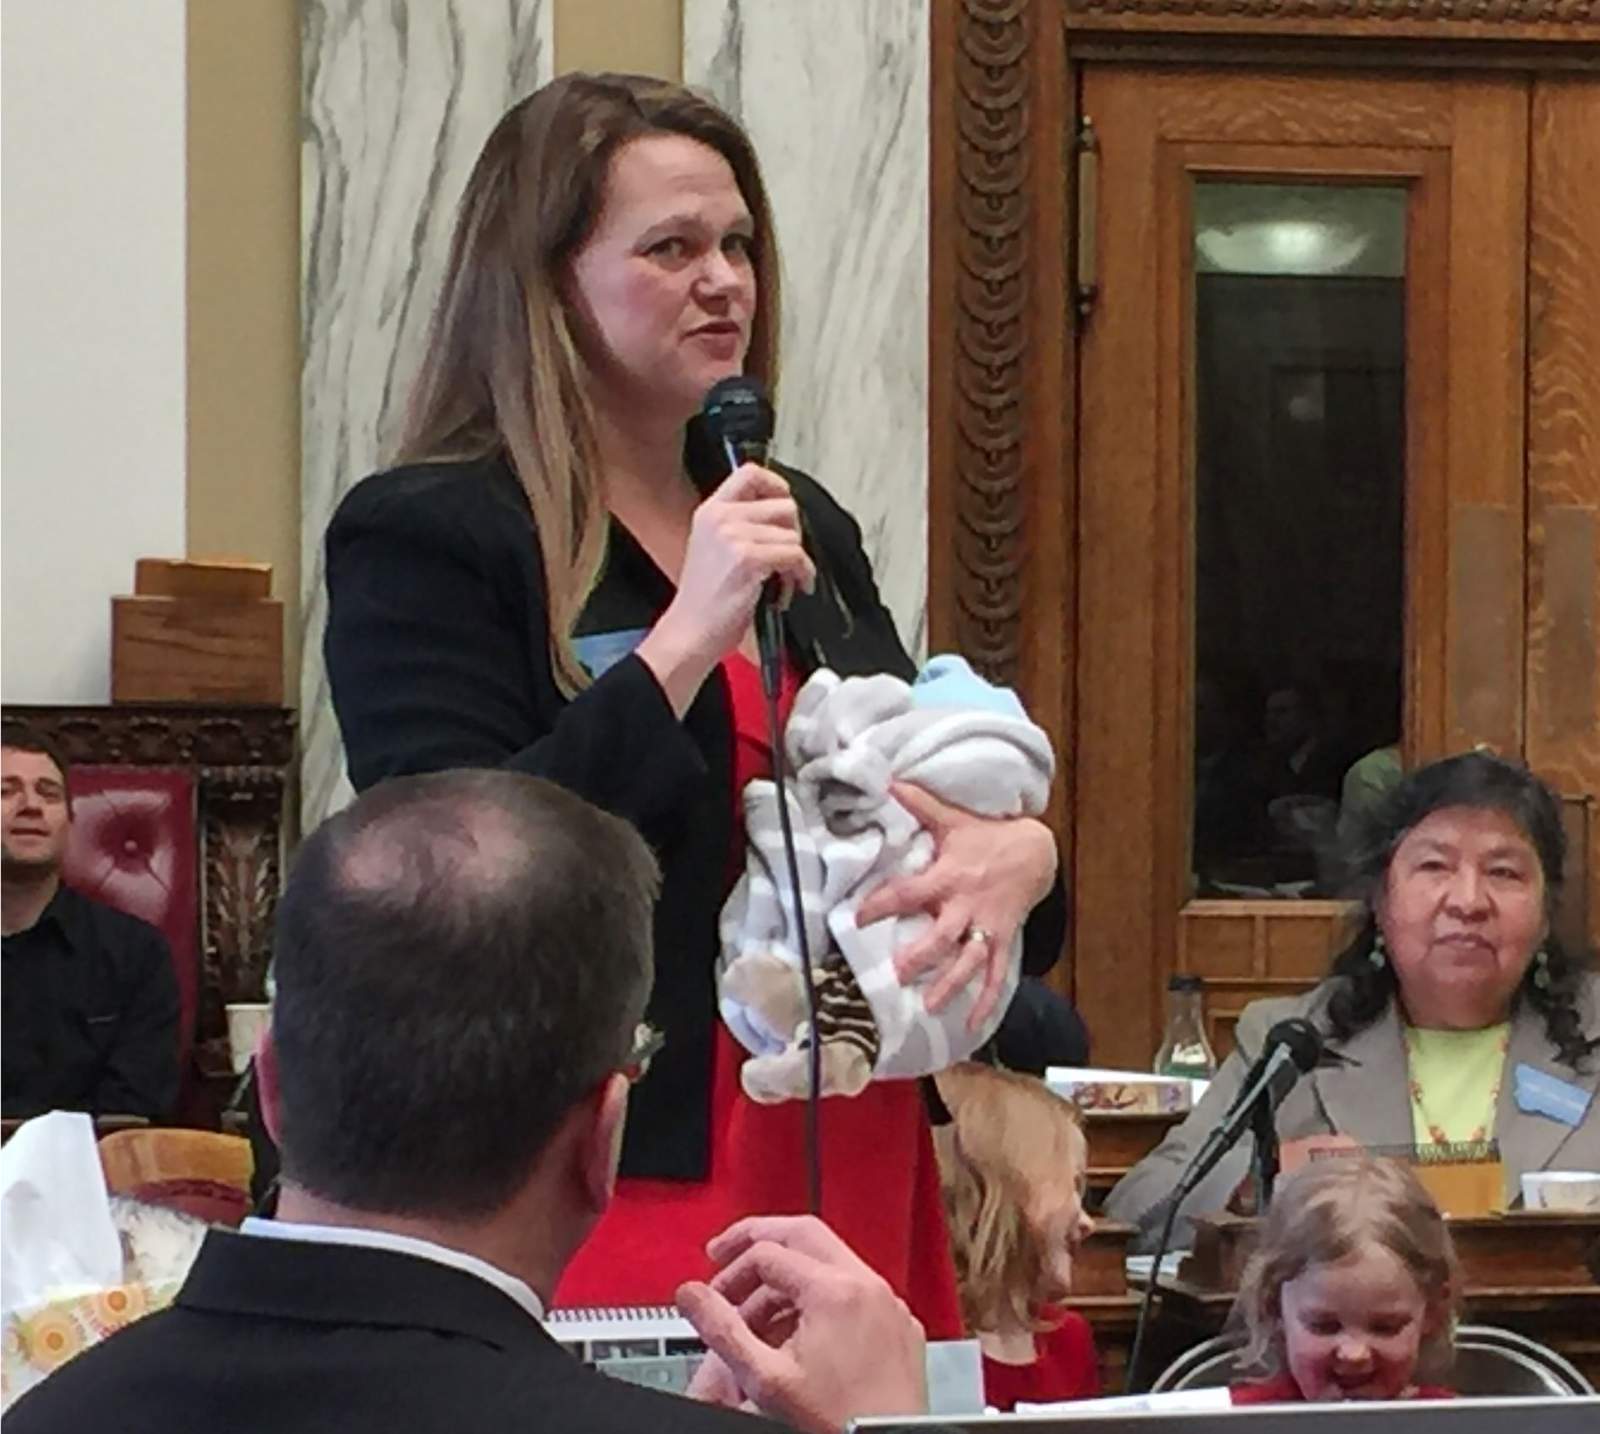 WDIV: As more women run for office, child care remains a hurdle